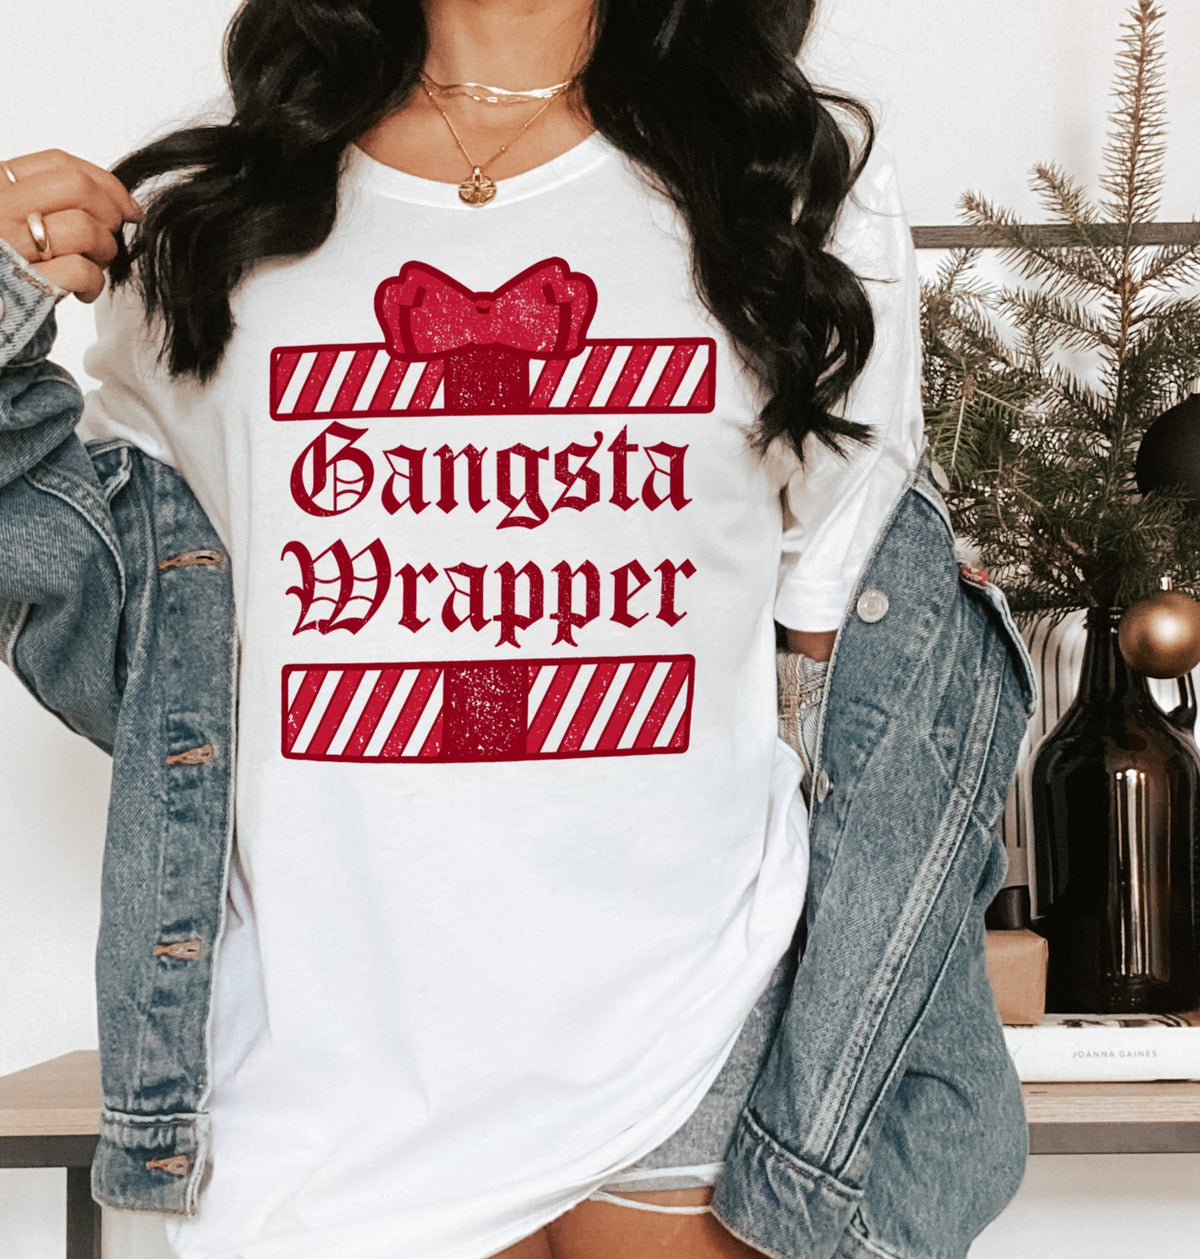 white shirt with a present that says gangsta wrapper - HighCiti